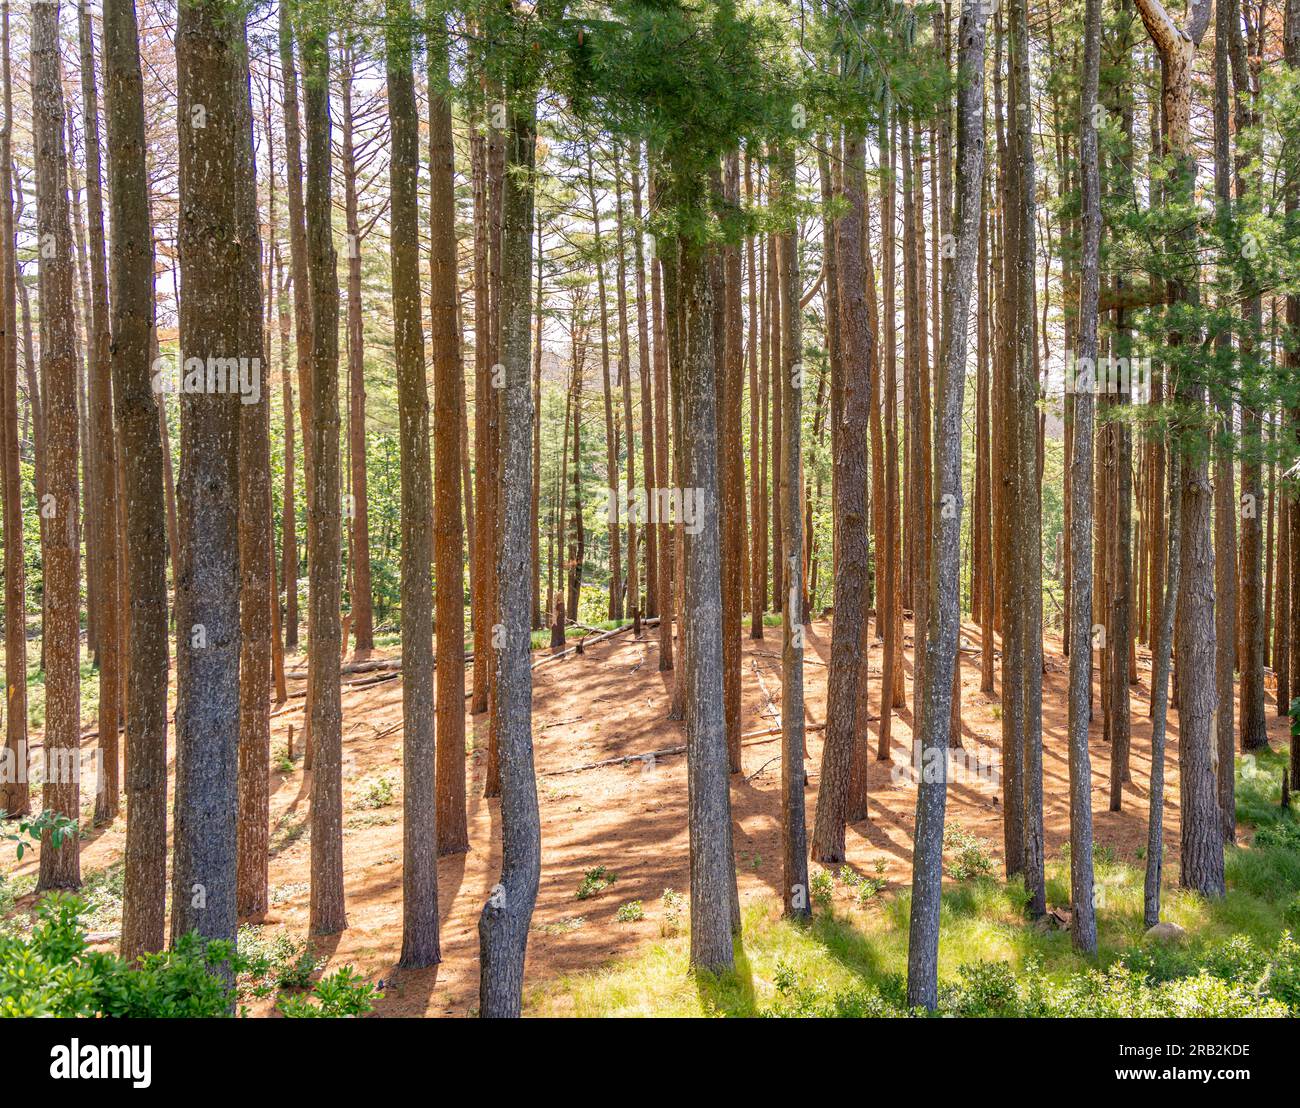 A natural setting full of tall pines Stock Photo